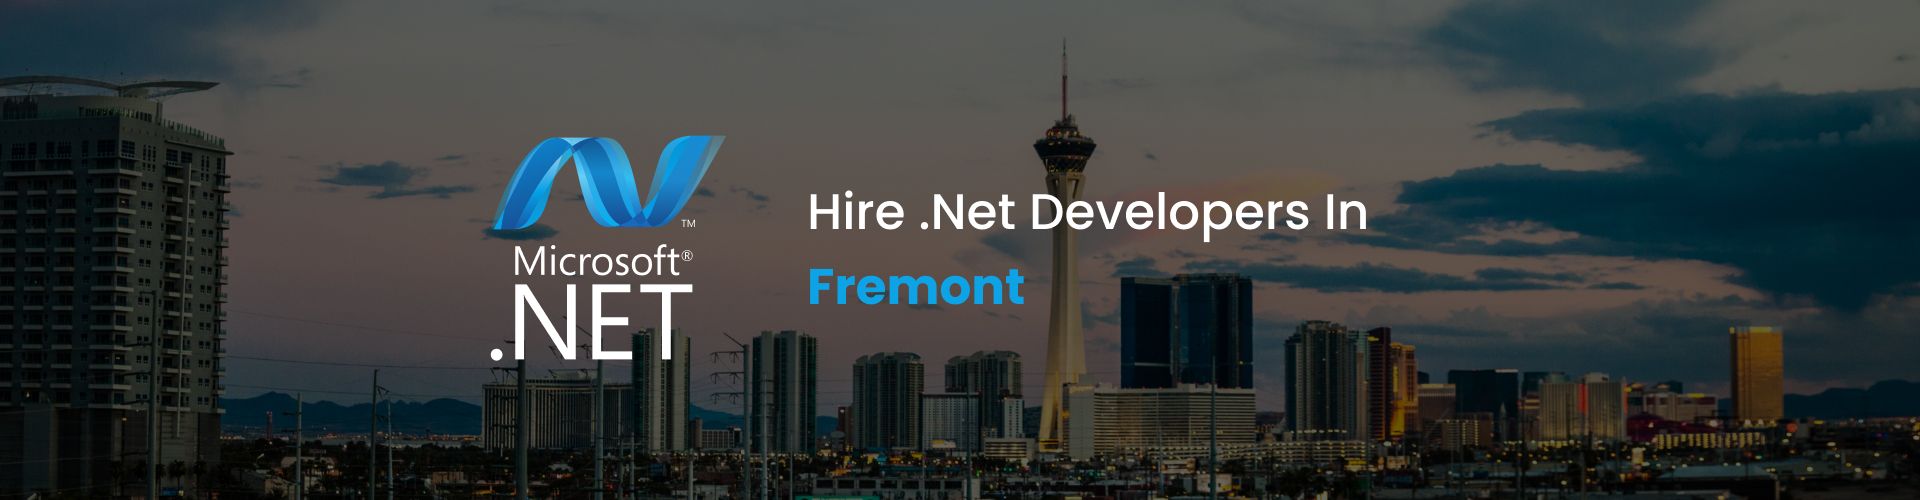 hire .net developers in fremont